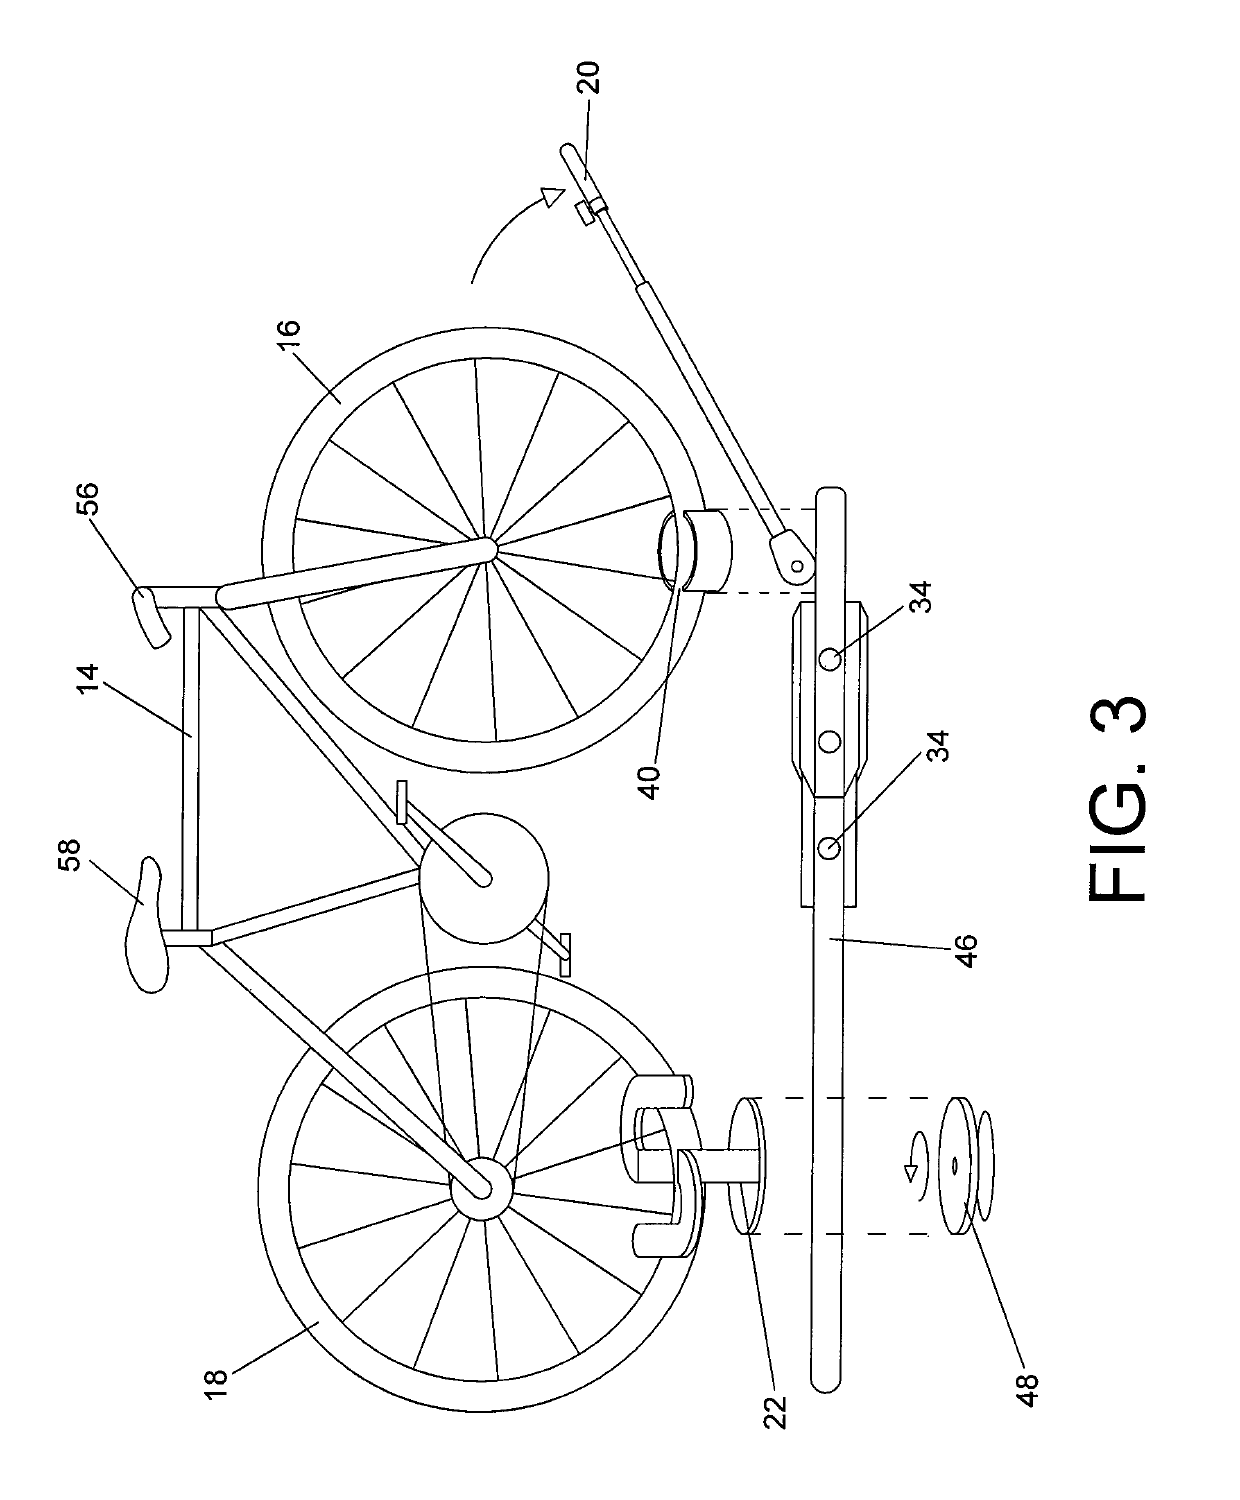 Method and system for carrying a bicycle on a vehicle